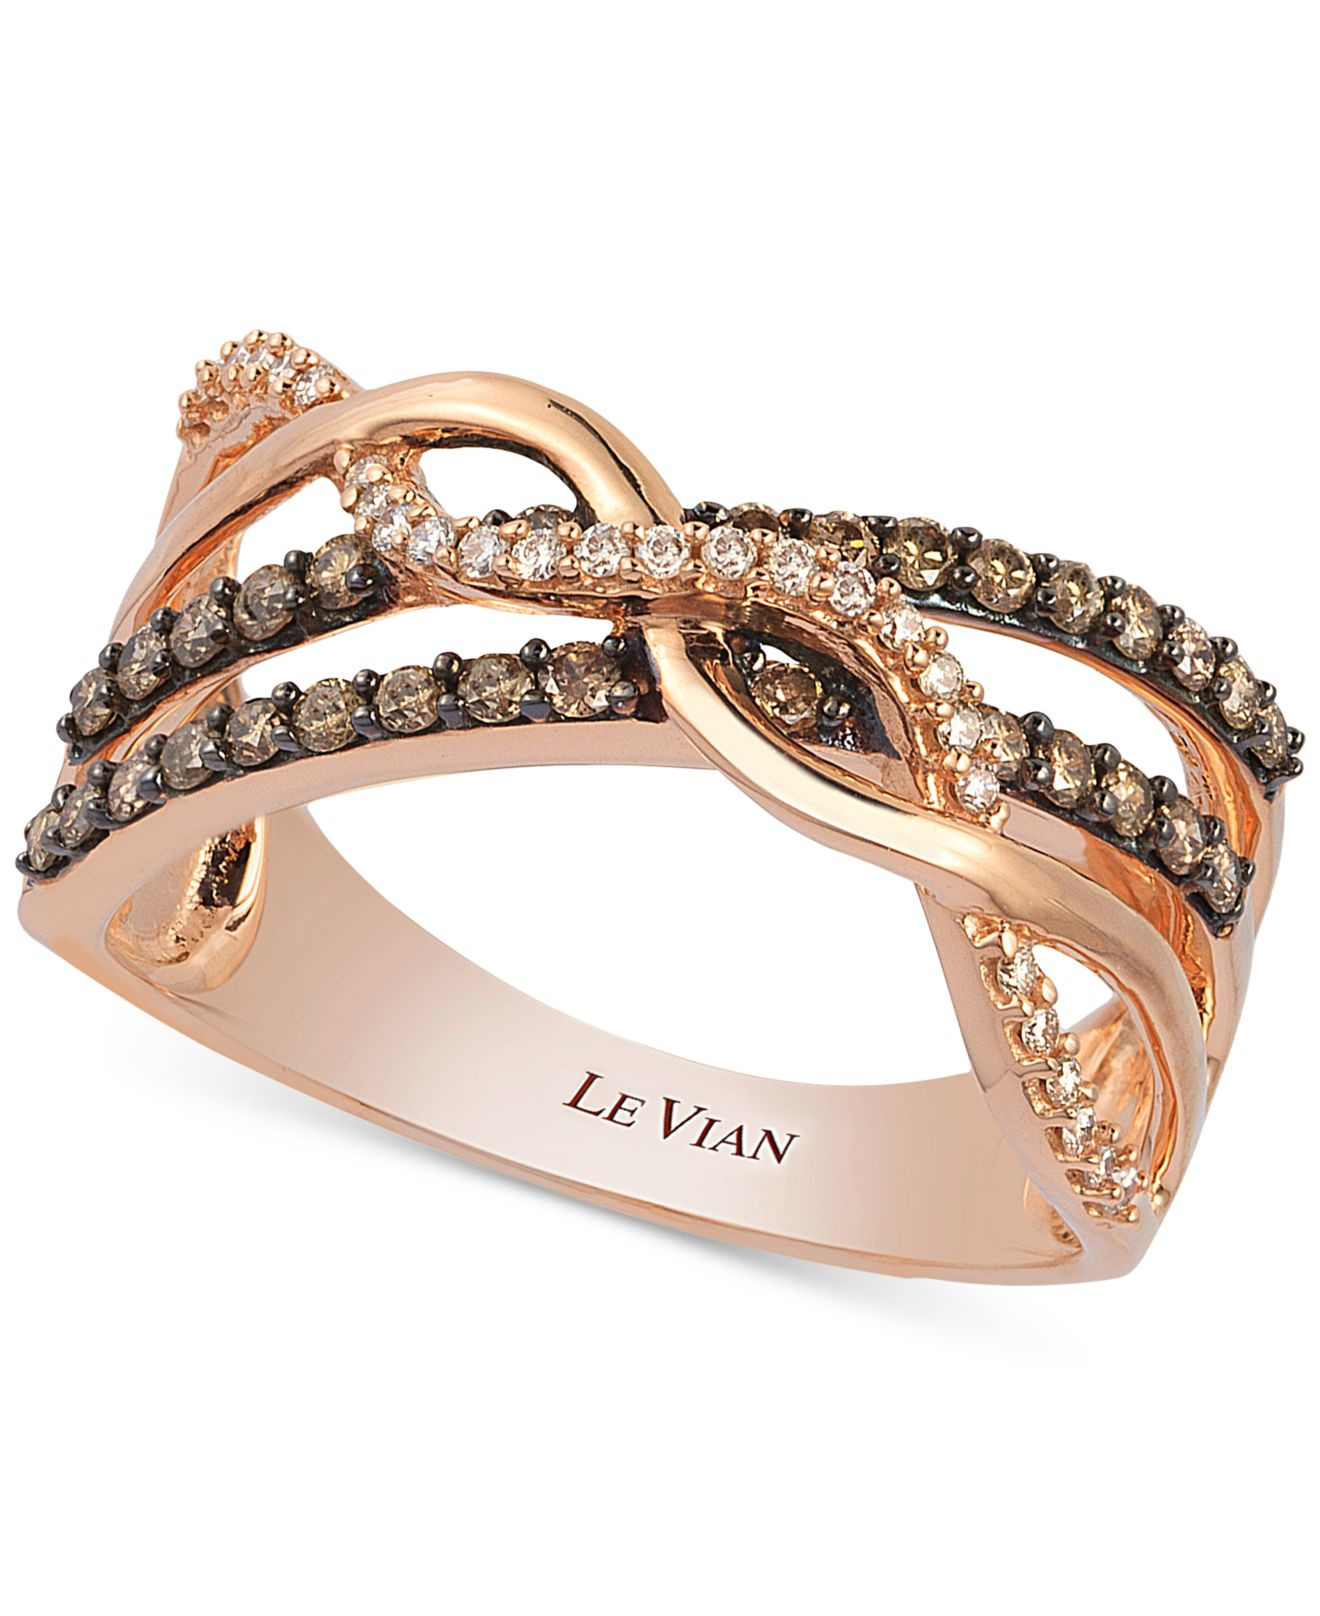 Levian Chocolate Diamond Rings
 Lyst Le vian Chocolate And White Diamond Crossover Ring